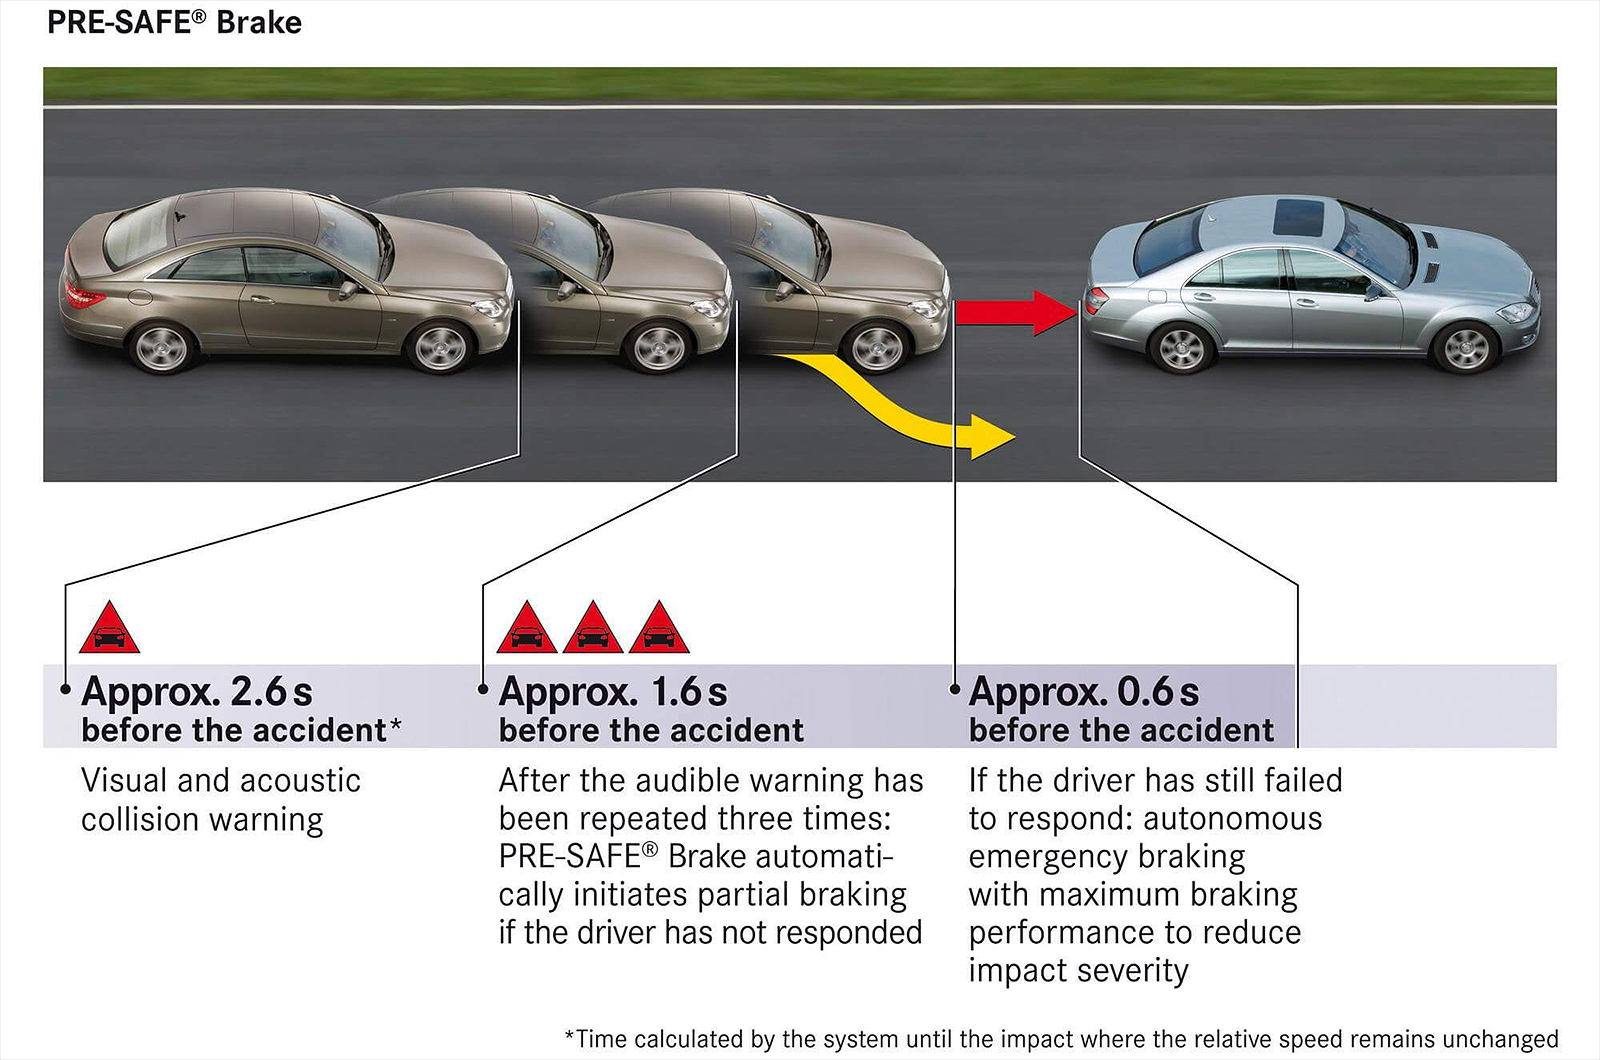 <p>Mercedes-Benz launched the world’s first autonomous emergency braking (AEB) system at the end of 2006. Called <strong>Pre-Safe Brake</strong>, the feature was offered as an option on the new <strong>W221 S-Class</strong> and the <strong>C216 CL-Class</strong>. AEB relied on existing technology. Near- and long-range radars scoped out the road ahead and sent a signal to the ECU if they detected an imminent collision. The car emitted audible and visual warnings and automatically applied 40% of the maximum brake performance if the driver didn’t react.</p><p>This process happened in mere milliseconds. Mercedes’ in-house research found AEB could prevent 70% of rear-end collisions. It reduced the severity of the ones it couldn’t avert by around 40%. In 2009 Mercedes upgraded the system, enabling maximum braking force in emergency situations, first fitting it to the new <strong>W212 E-Class</strong>.</p><p>AEB quickly spread across the automotive industry and it began trickling down to more affordable cars in the early 2010s. It didn’t take long for law-makers to notice its unimpeachable life-saving potential, especially during the international rise of smartphones. AEB will be mandatory in new cars sold in Europe in 2021 and 2022 in the US.</p><p><strong>GROUNDBREAKER SCORE: 8 </strong>– in an age of distracted driving, even more important than ever.</p>